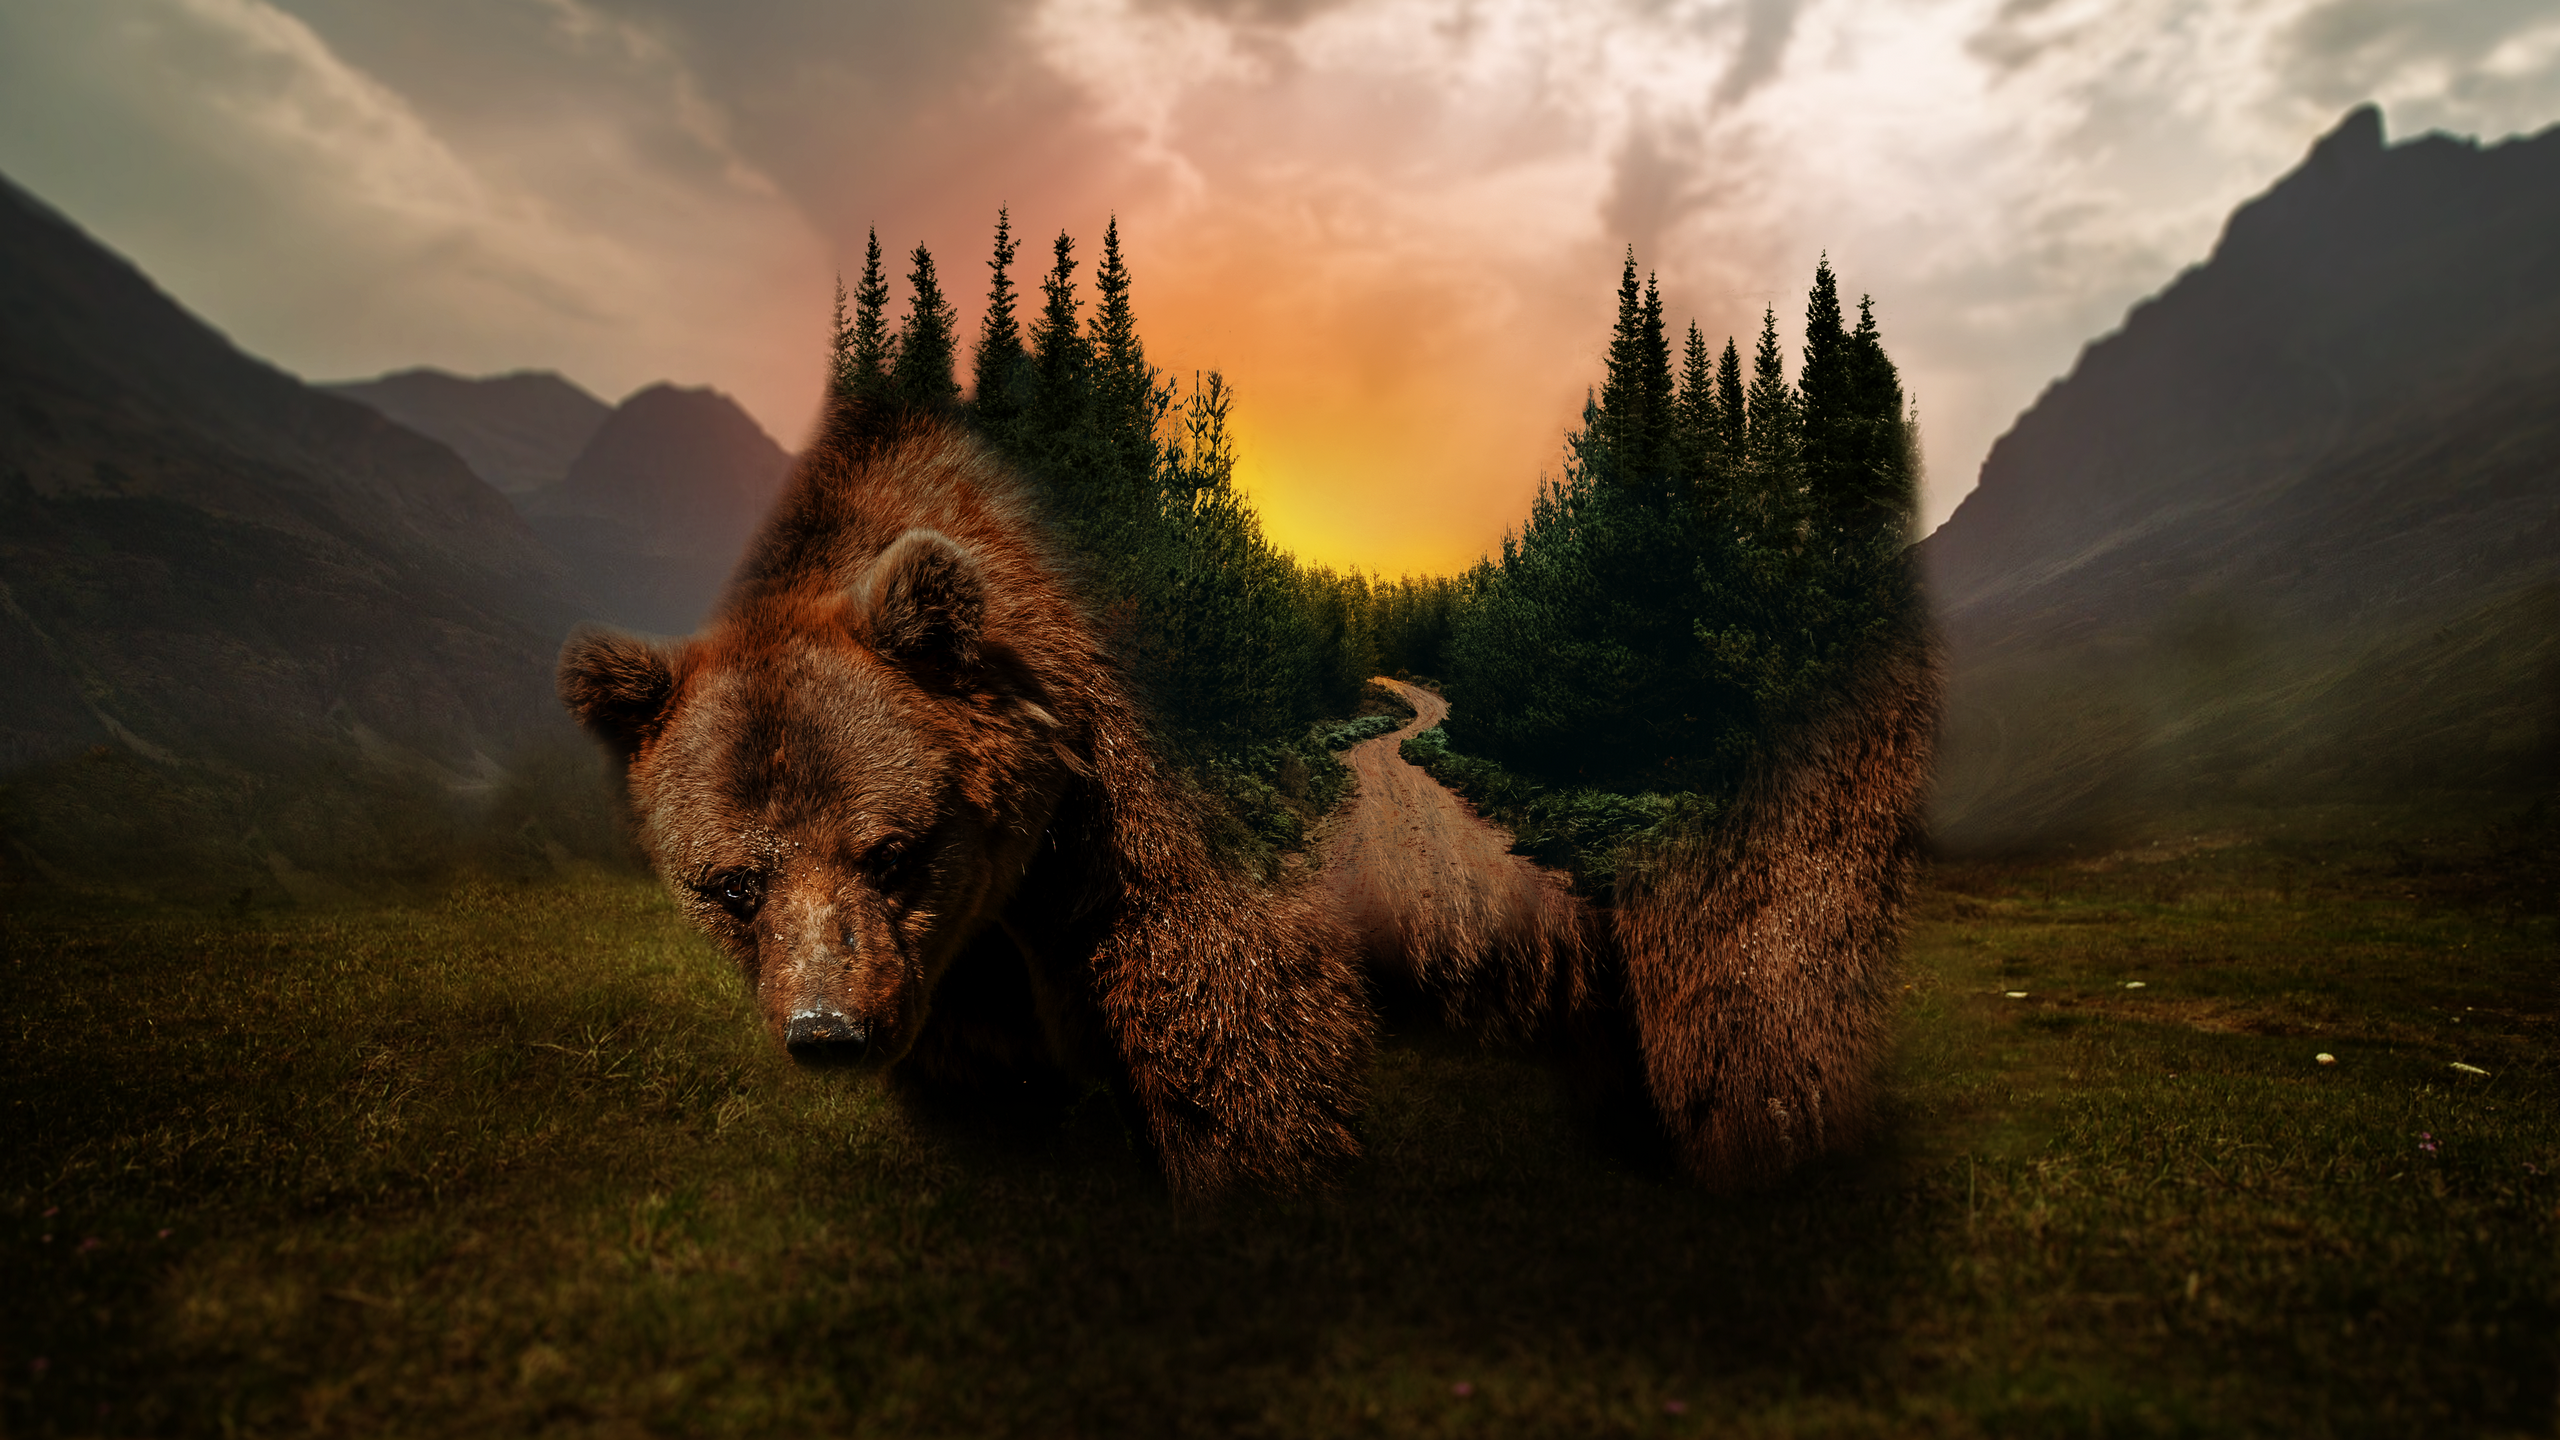 Wallpaper ID 129689 Grizzly bear forest sunset nature